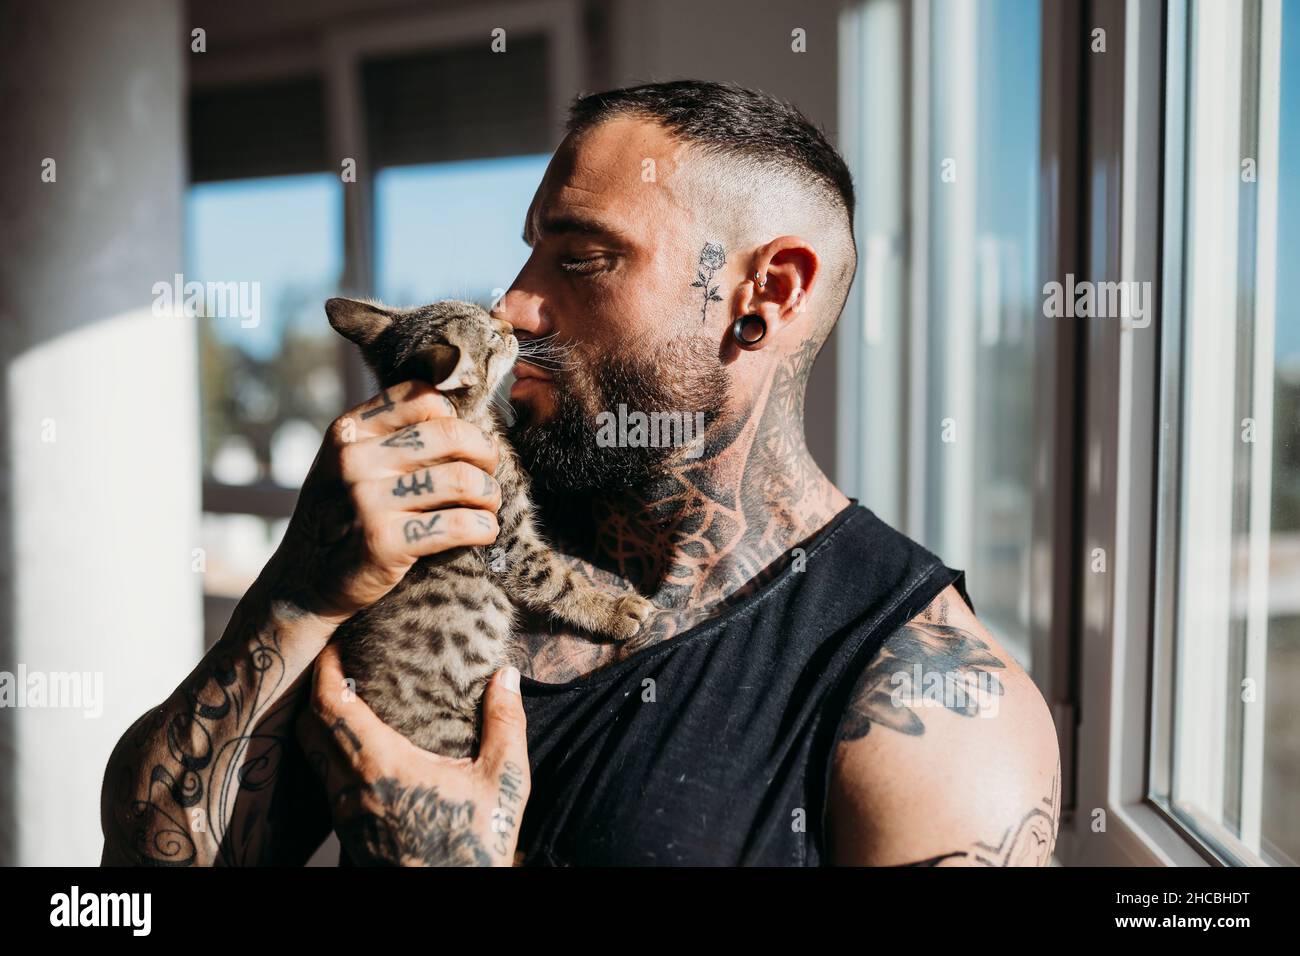 Man with tattoo kissing cat at home Stock Photo